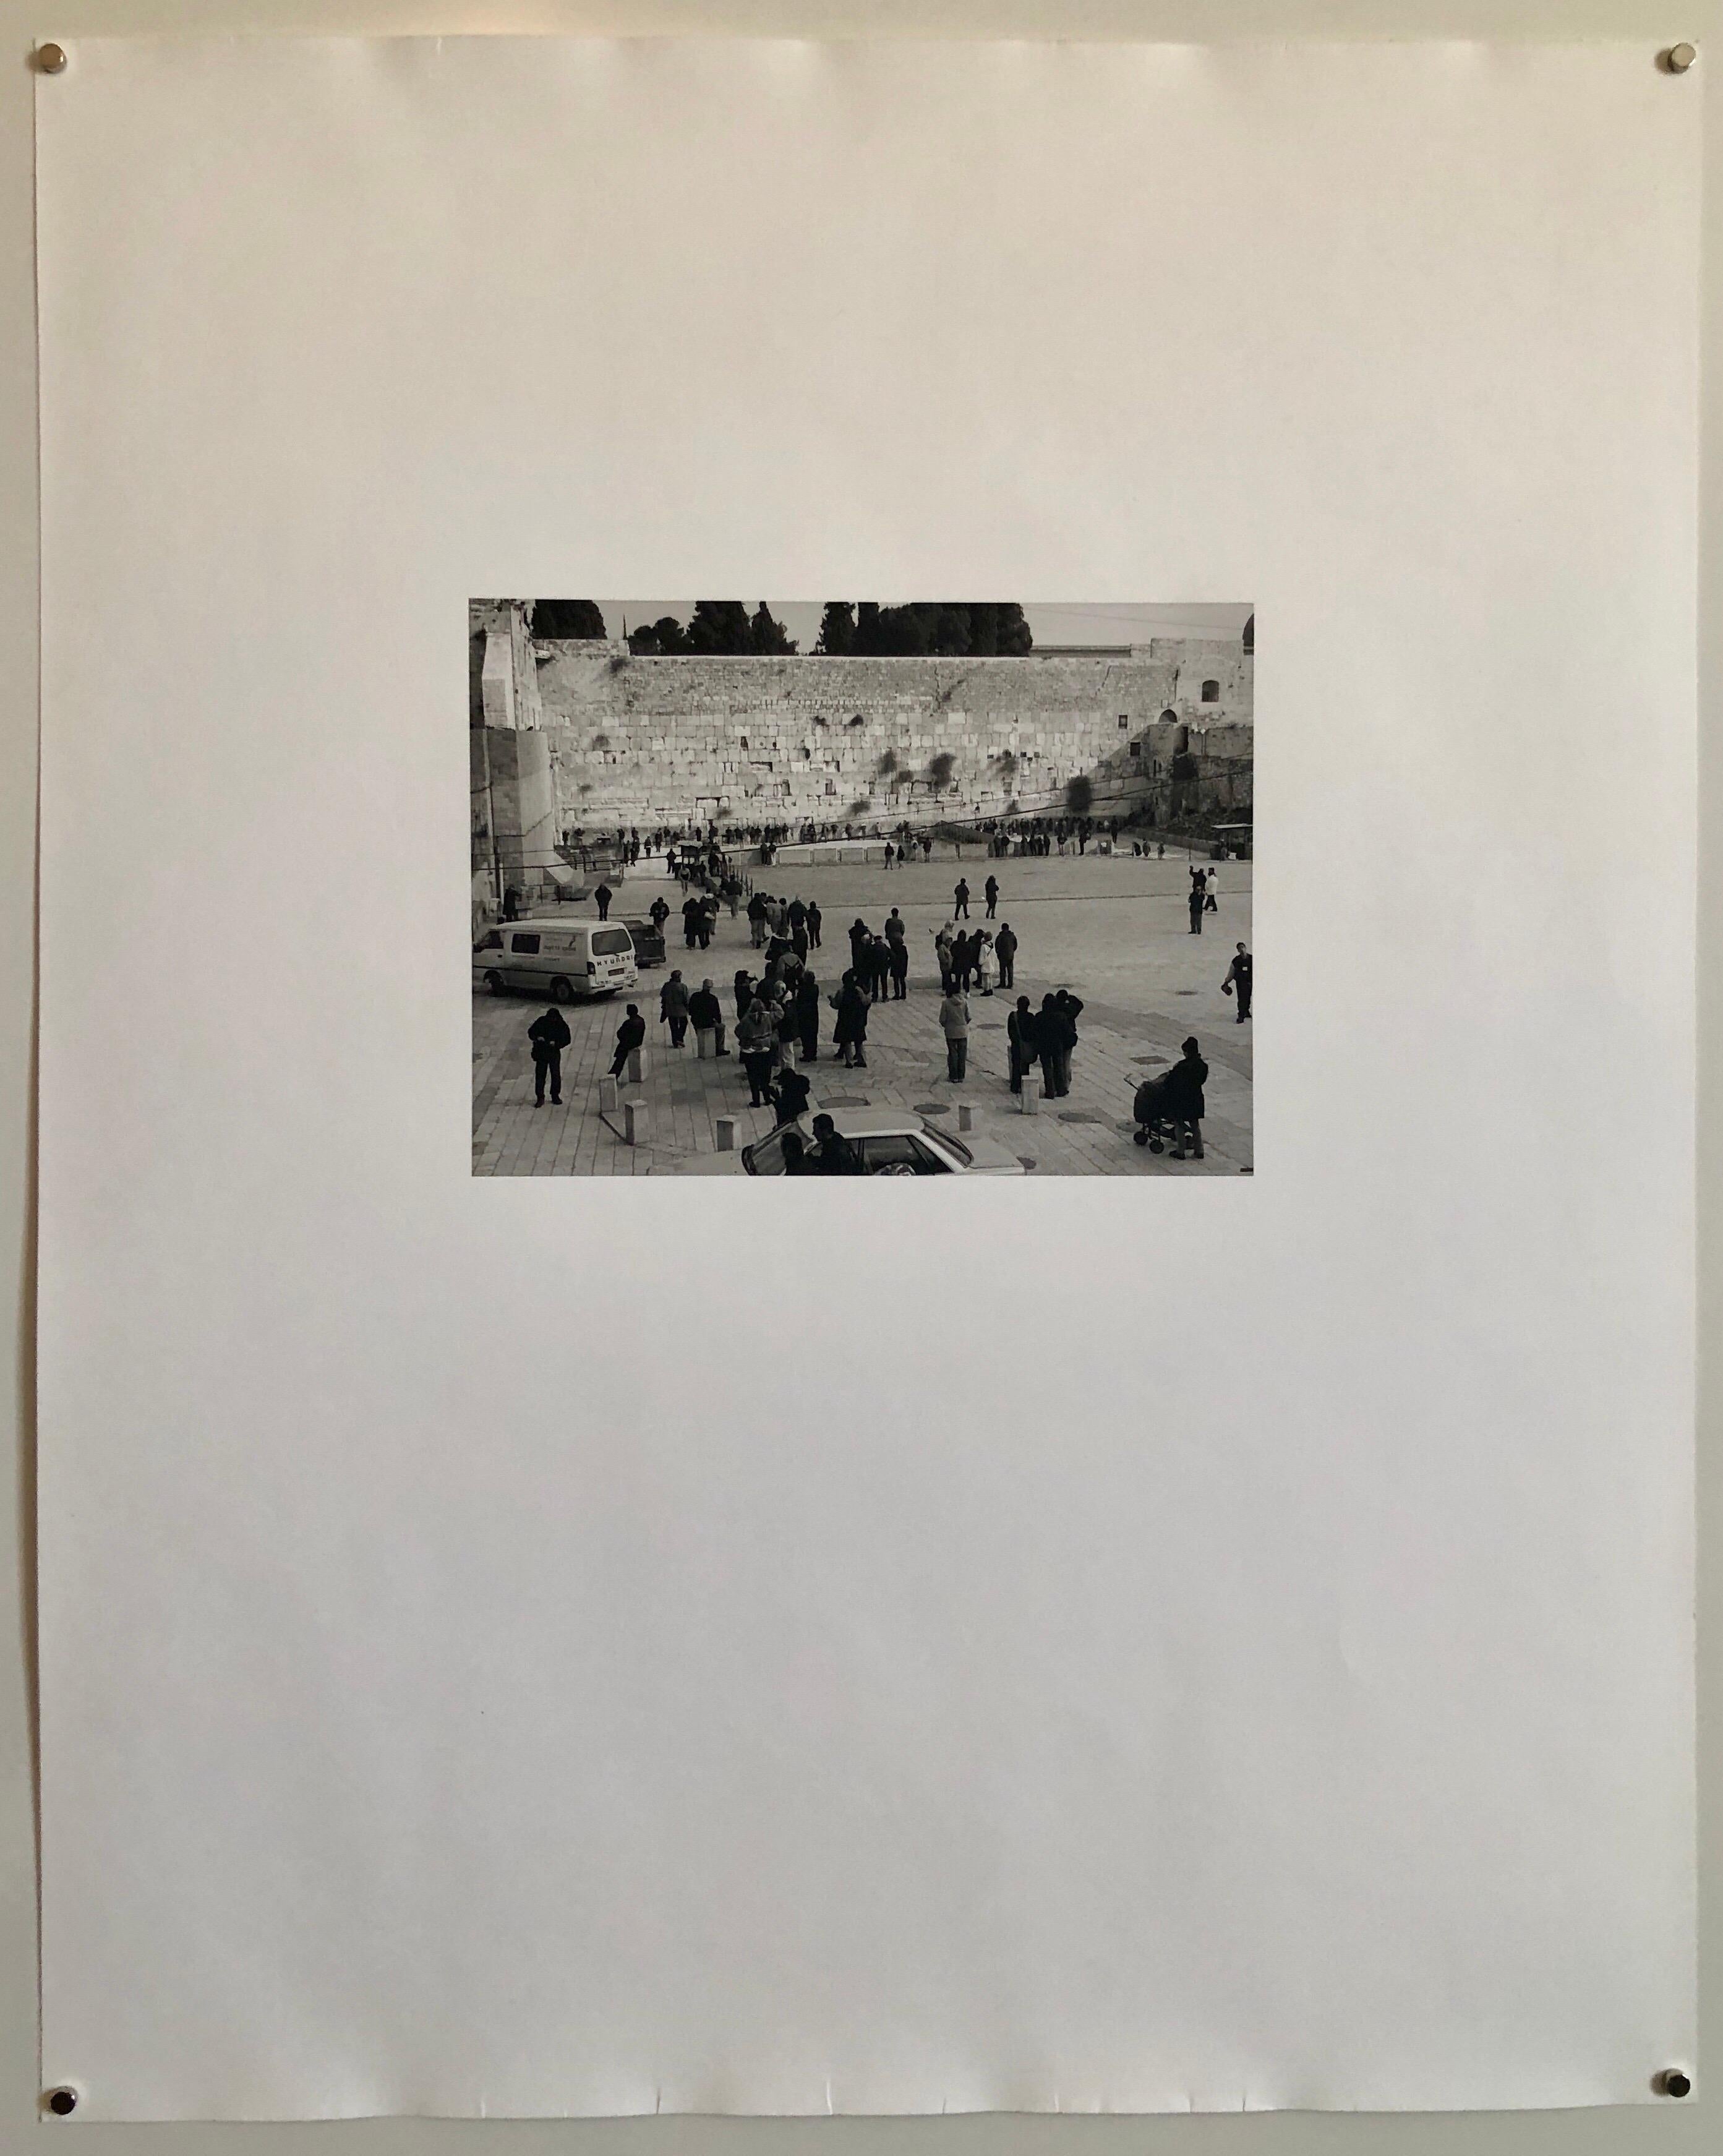 Photo Image taken in black & white of Western Wall (Wailing Wall) Kotel Hamaaravi in Jerusalem Israel. Hand signed, dated and titled. From very small edition of just 5 prints. 

(American-Israeli) Born in New York City, Mikael Levin grew up in